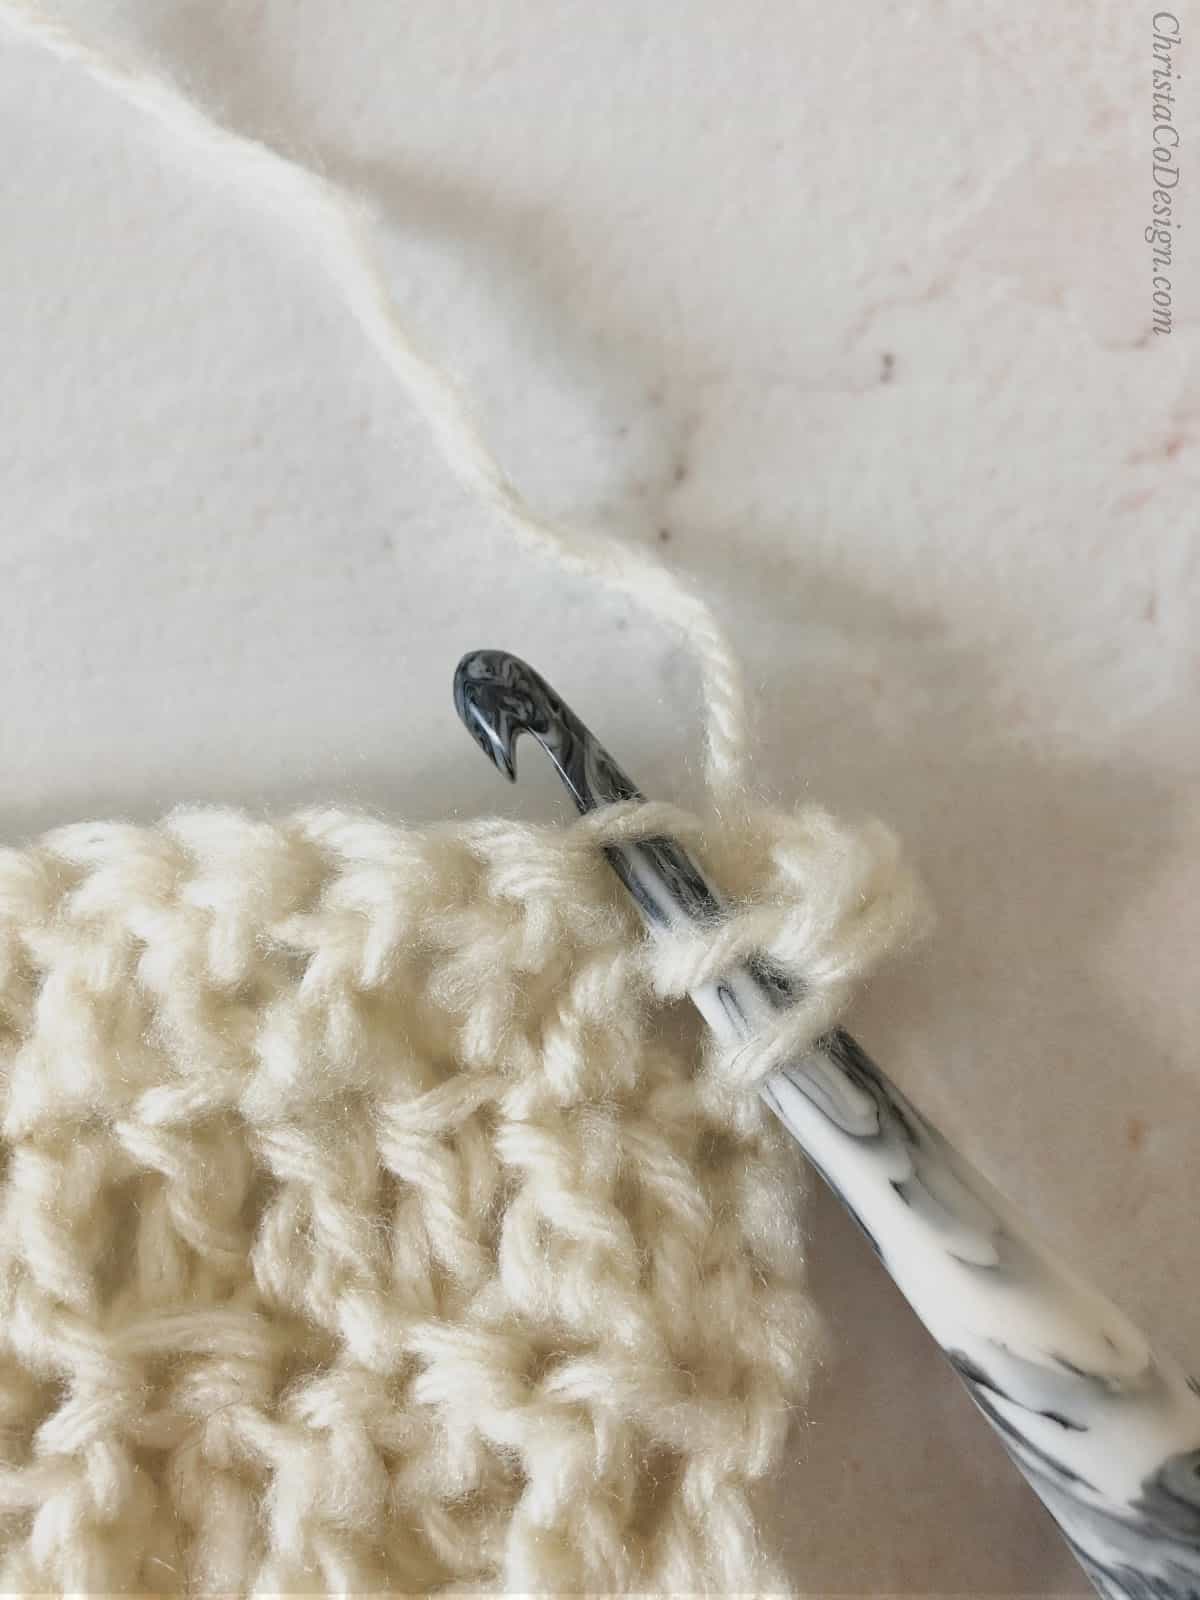 picture of inserting crochet hook into front loop of stitch